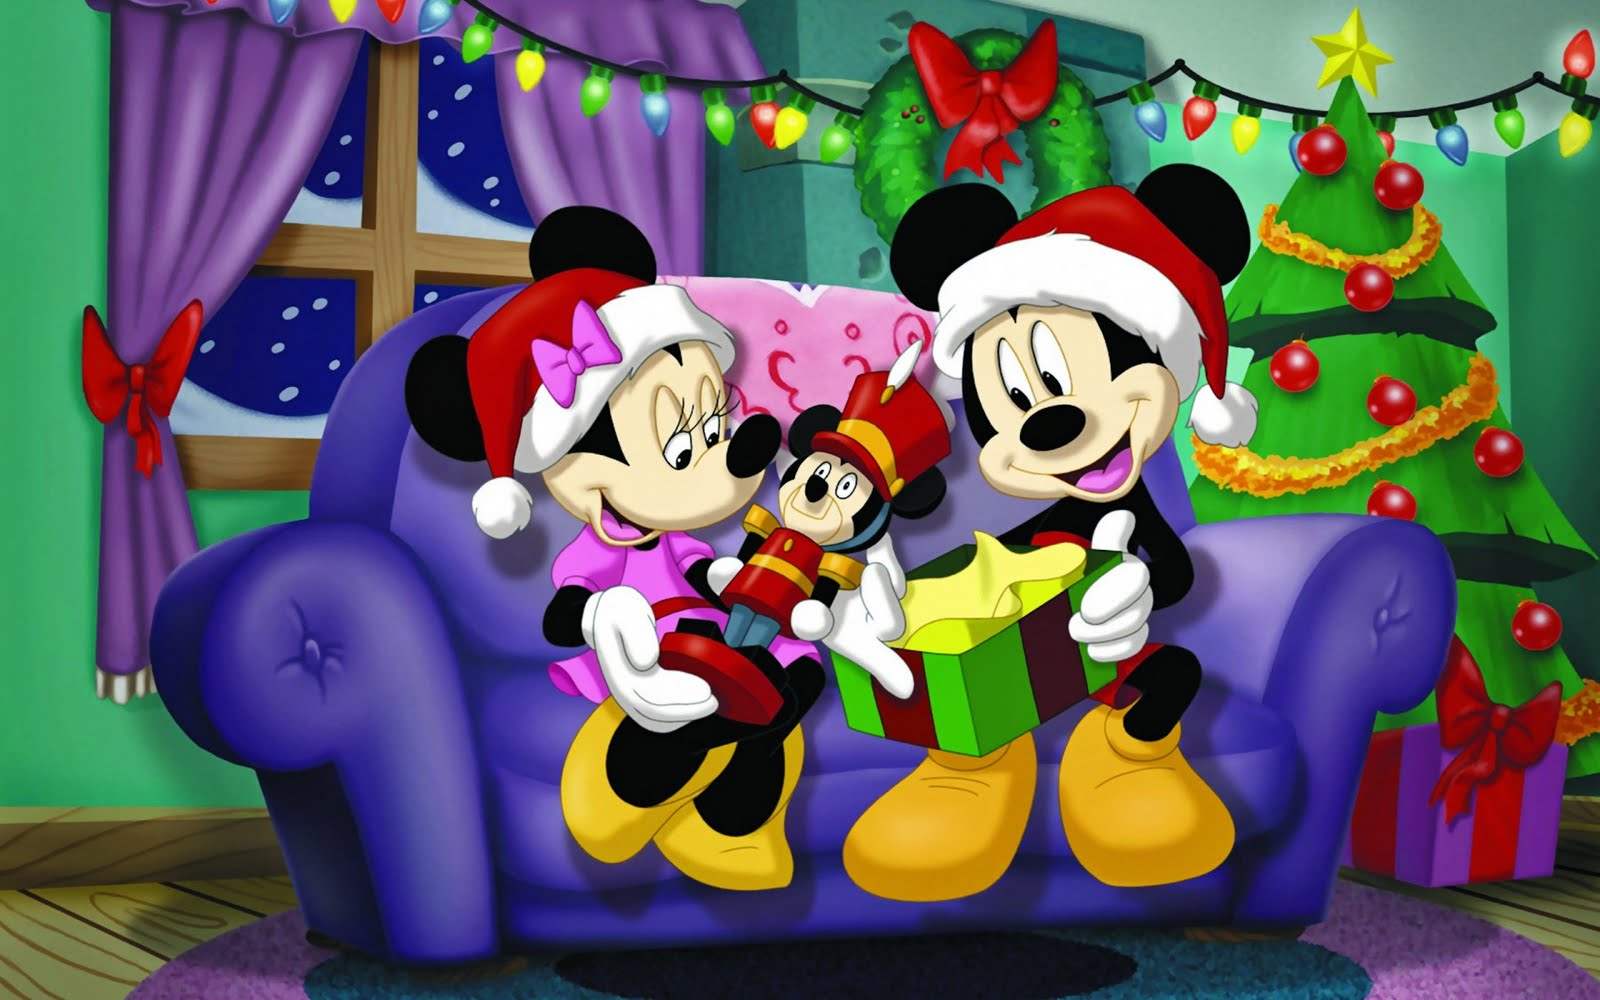 Wallpapers Photo Art: Mickey Mouse Wallpaper, Disney Mickey Mouse Art